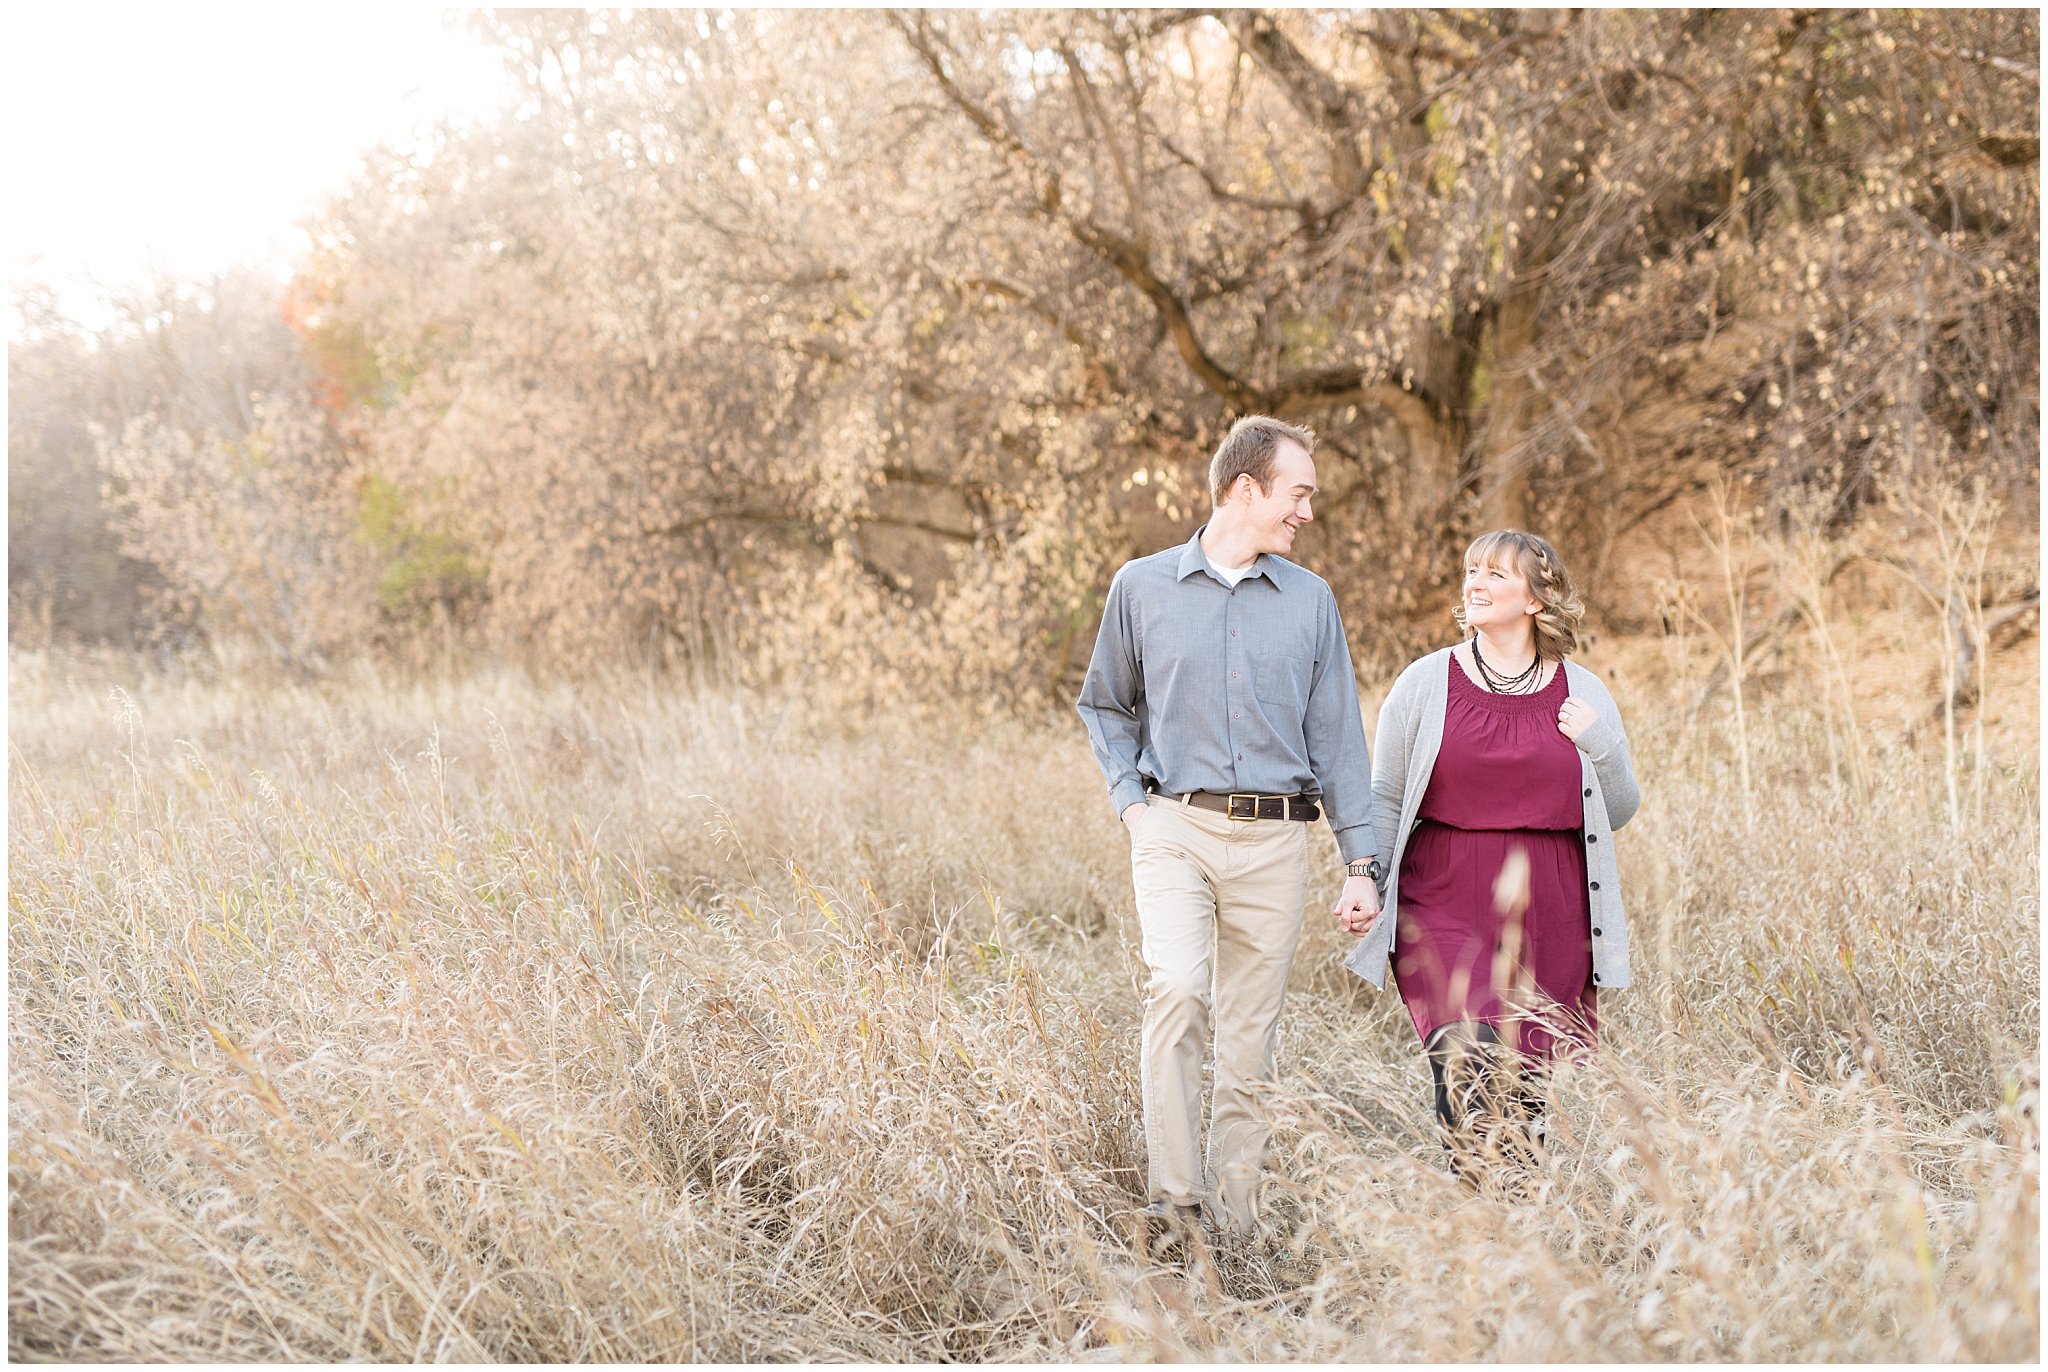 Utah Fall engagement | Couple walking in the fall grass | Jessie and Dallin Photography